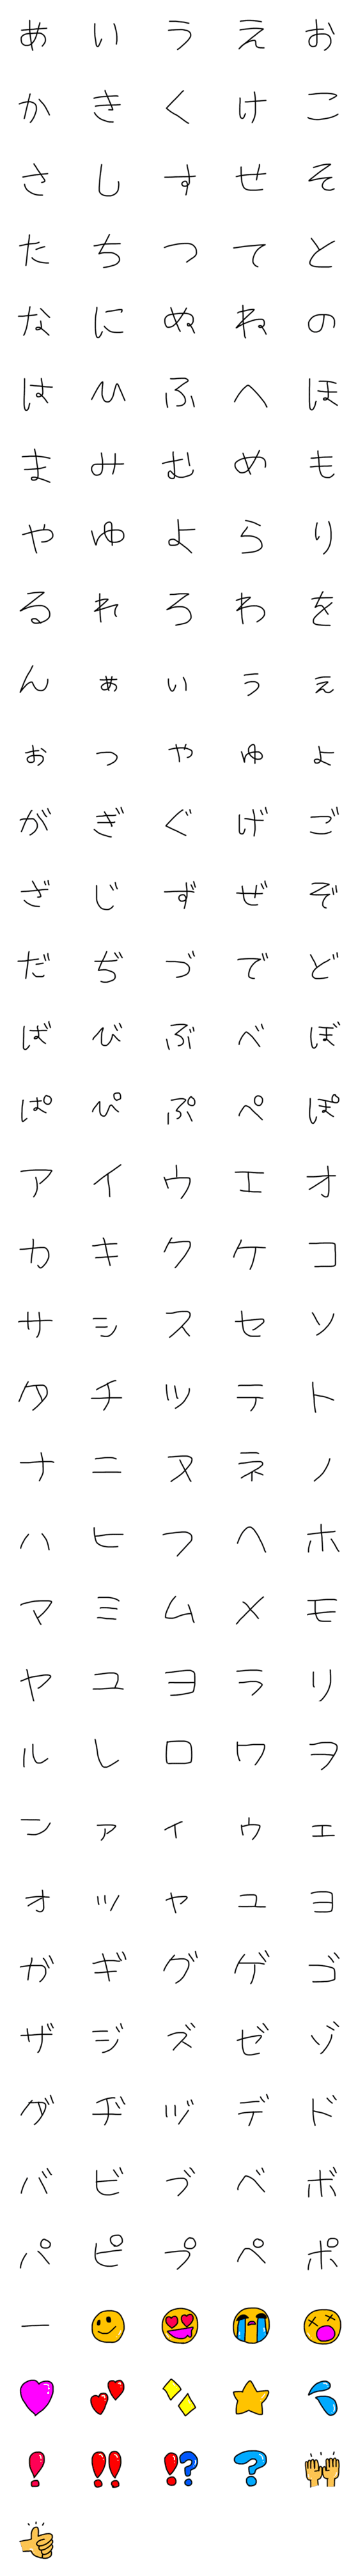 [LINE絵文字]使いやすいやーつの画像一覧